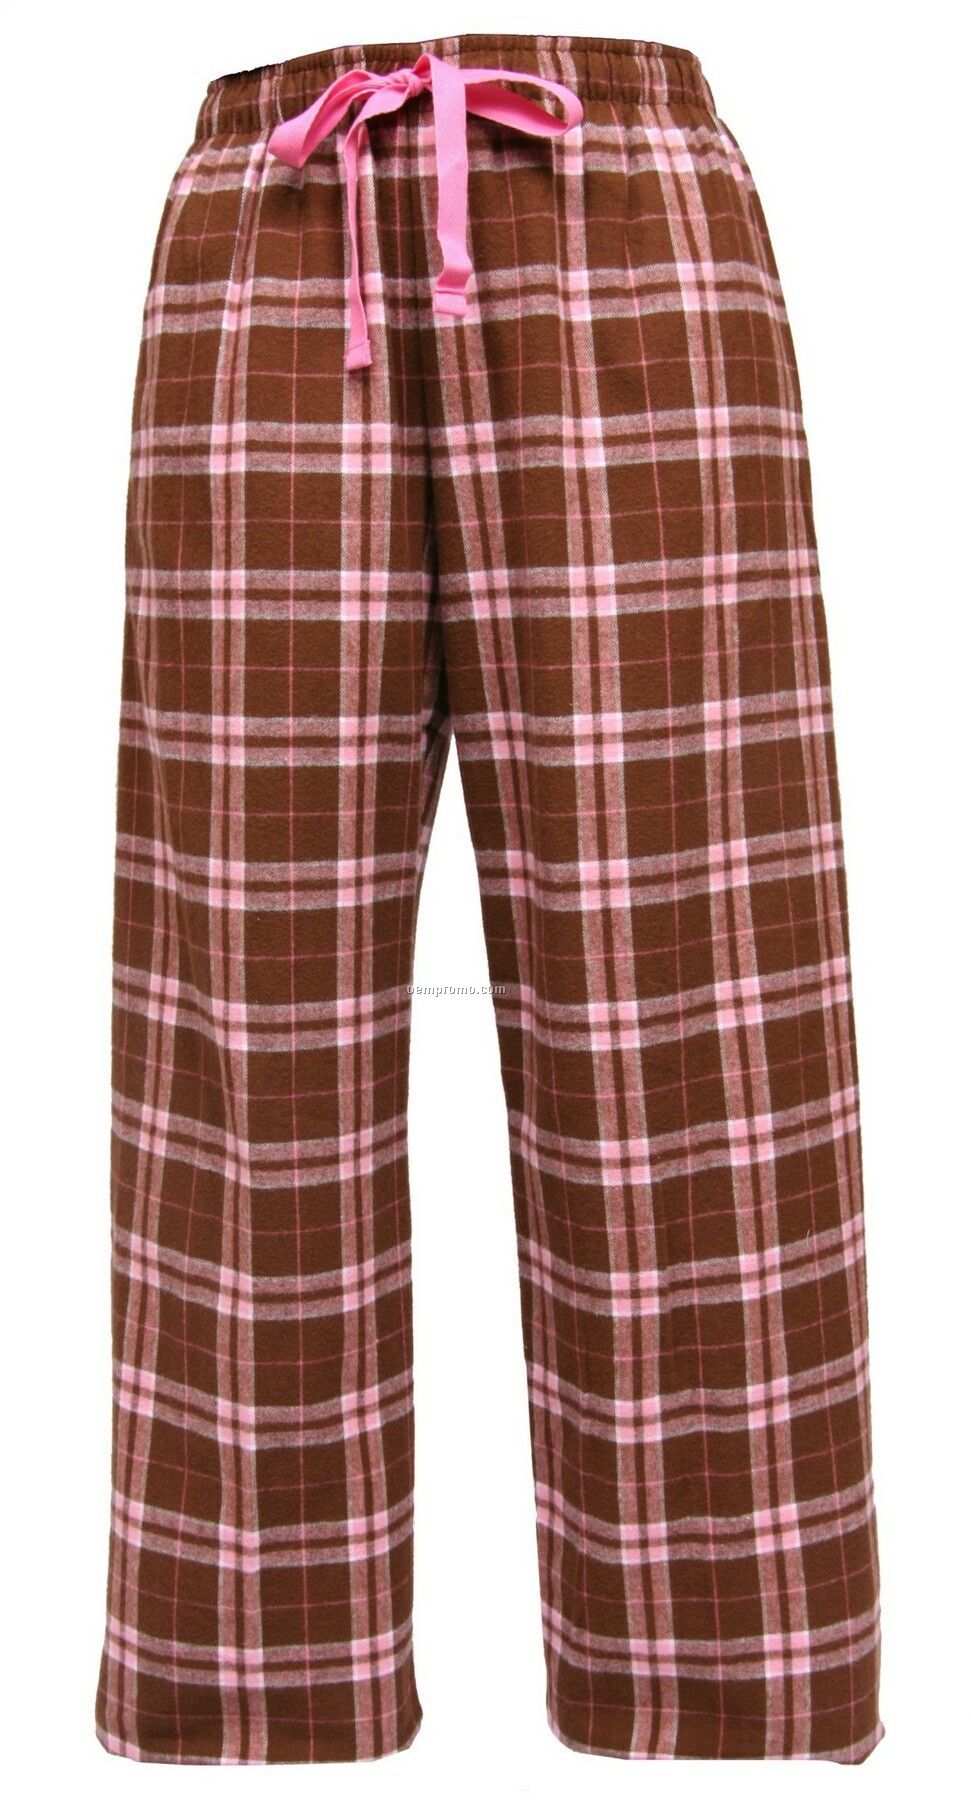 Adult Brown/Pink Plaid Fashion Flannel Pant With Tie Cord